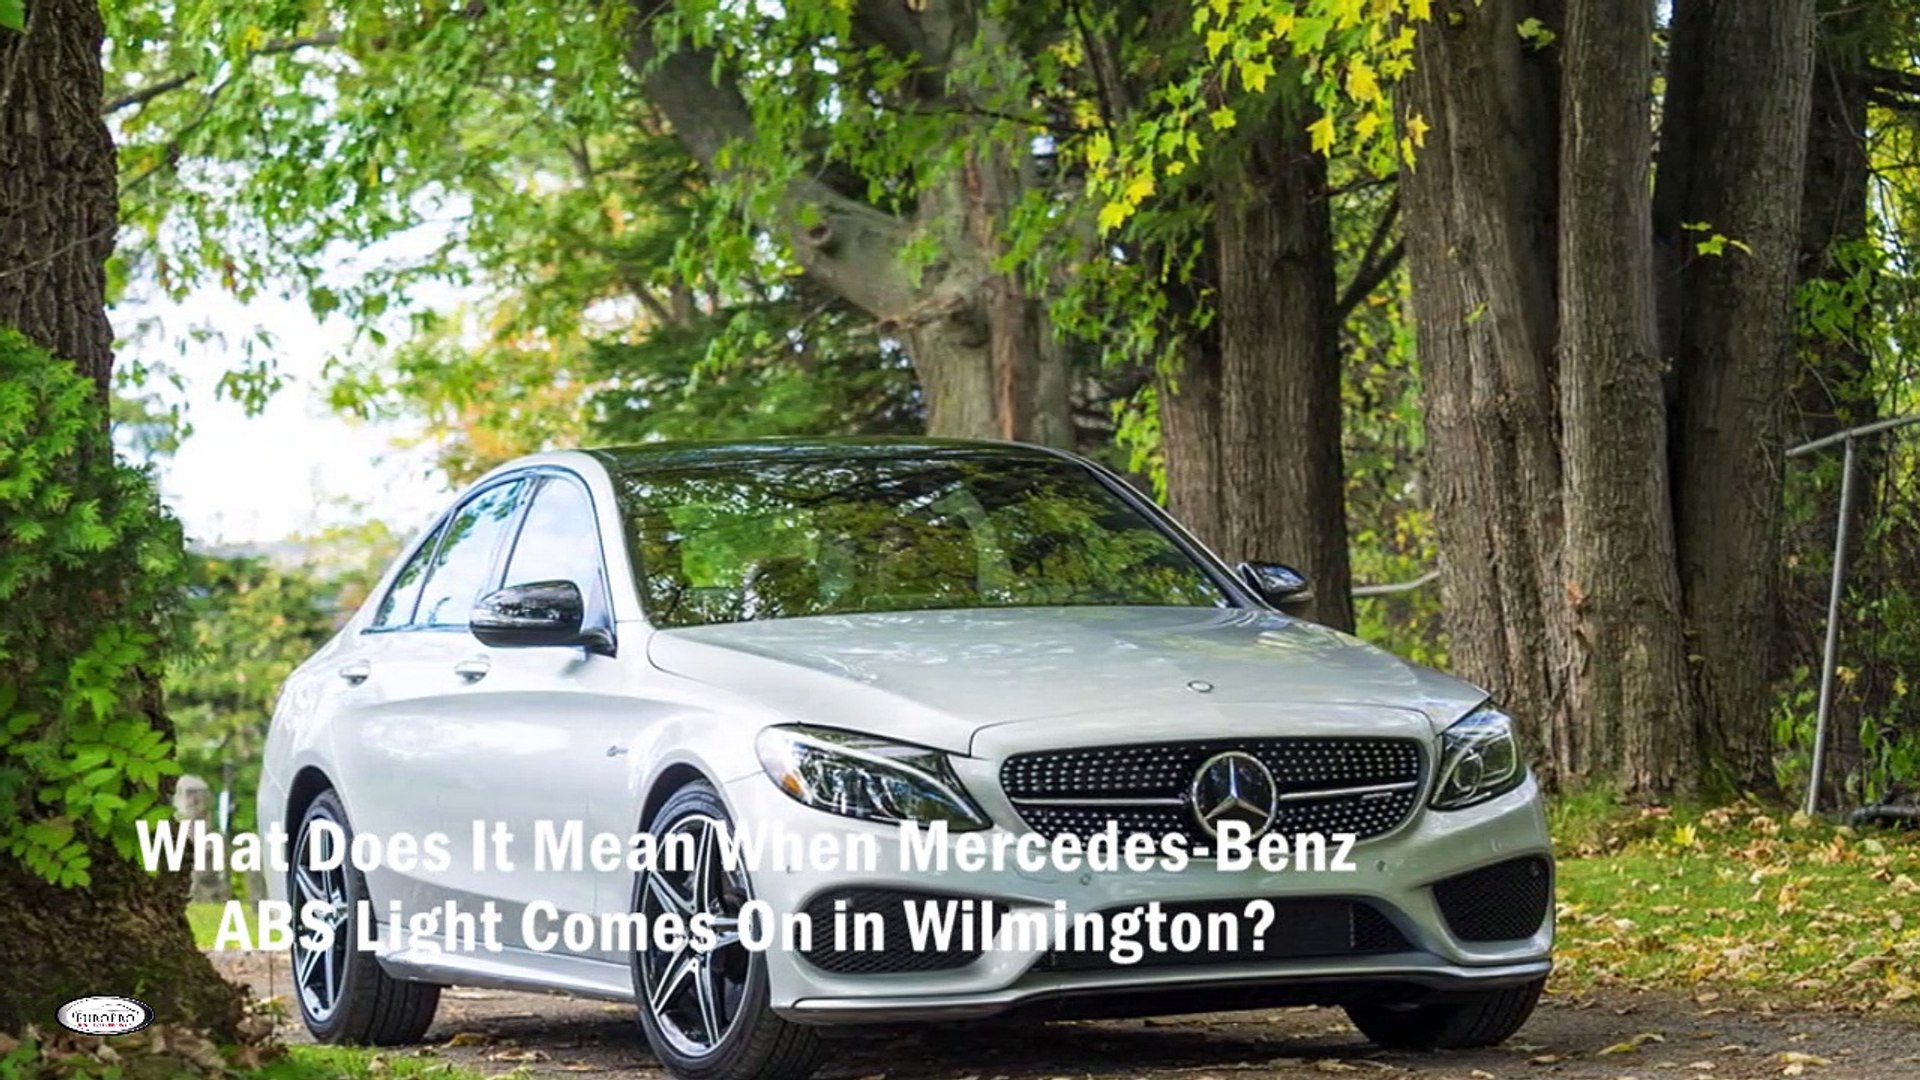 What Does Mean When Mercedes-Benz Comes On in Wilmington - video Dailymotion